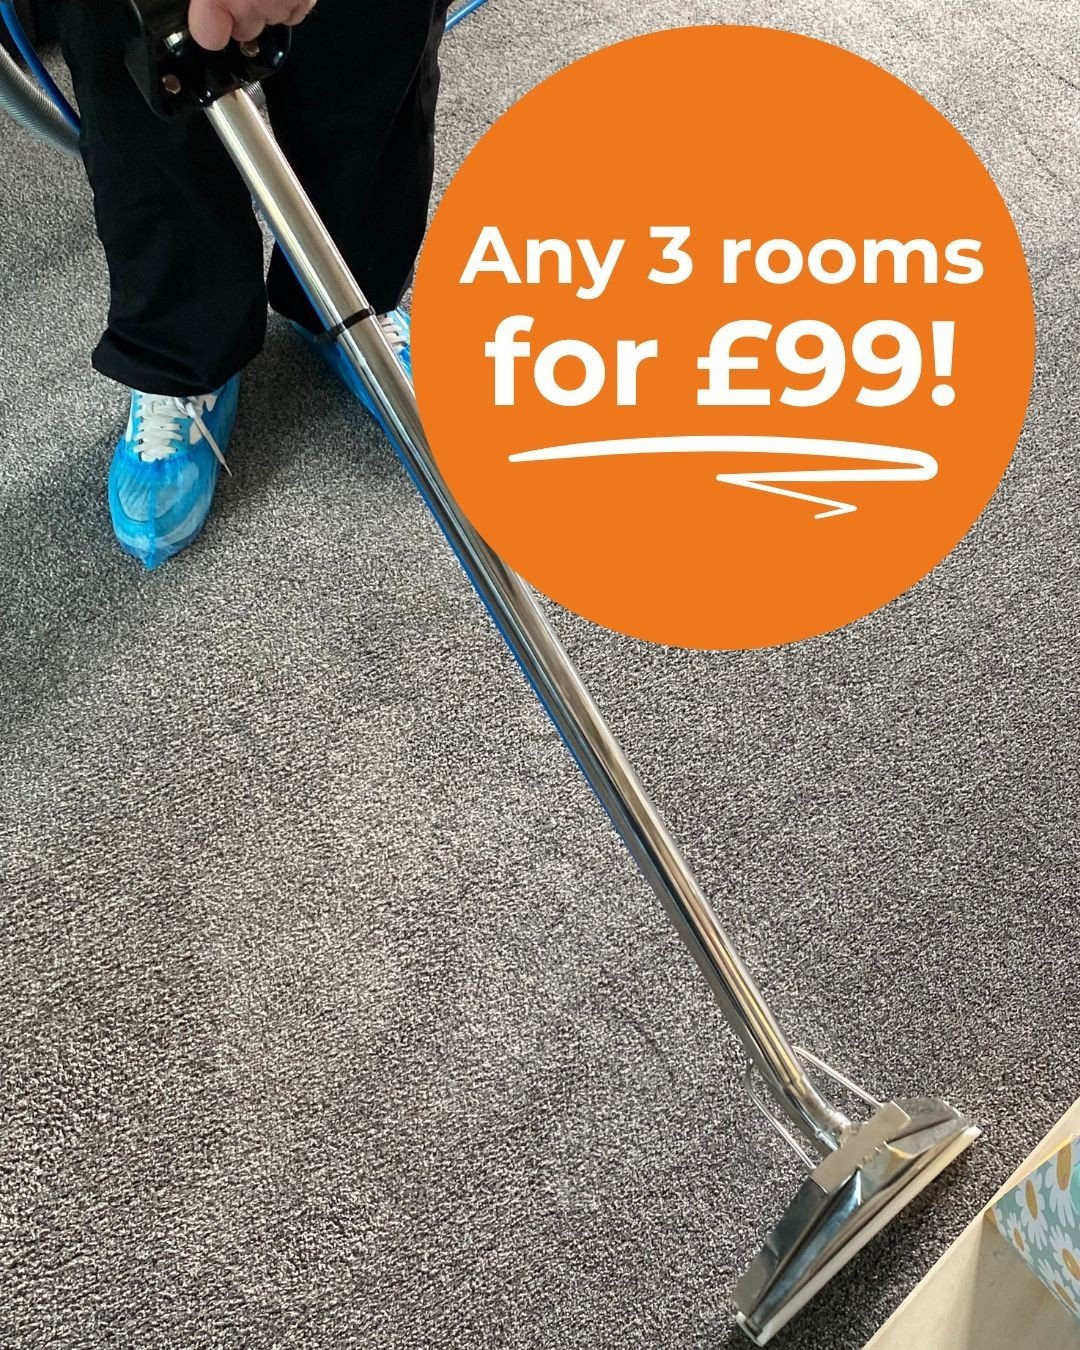 AMAZING DEAL ALERT! 📣⁠
⁠
Any 3 rooms for just &pound;99! ⁠
⁠
🧽 Only NCCA Member in the Braintree Area ⁠
🧽 State of the art equipment⁠
🧽 Truly independent⁠
🧽 Servicing all of Essex!⁠
⁠
Call 01376 618373 to book your appointment! ⁠
⁠
*any addition